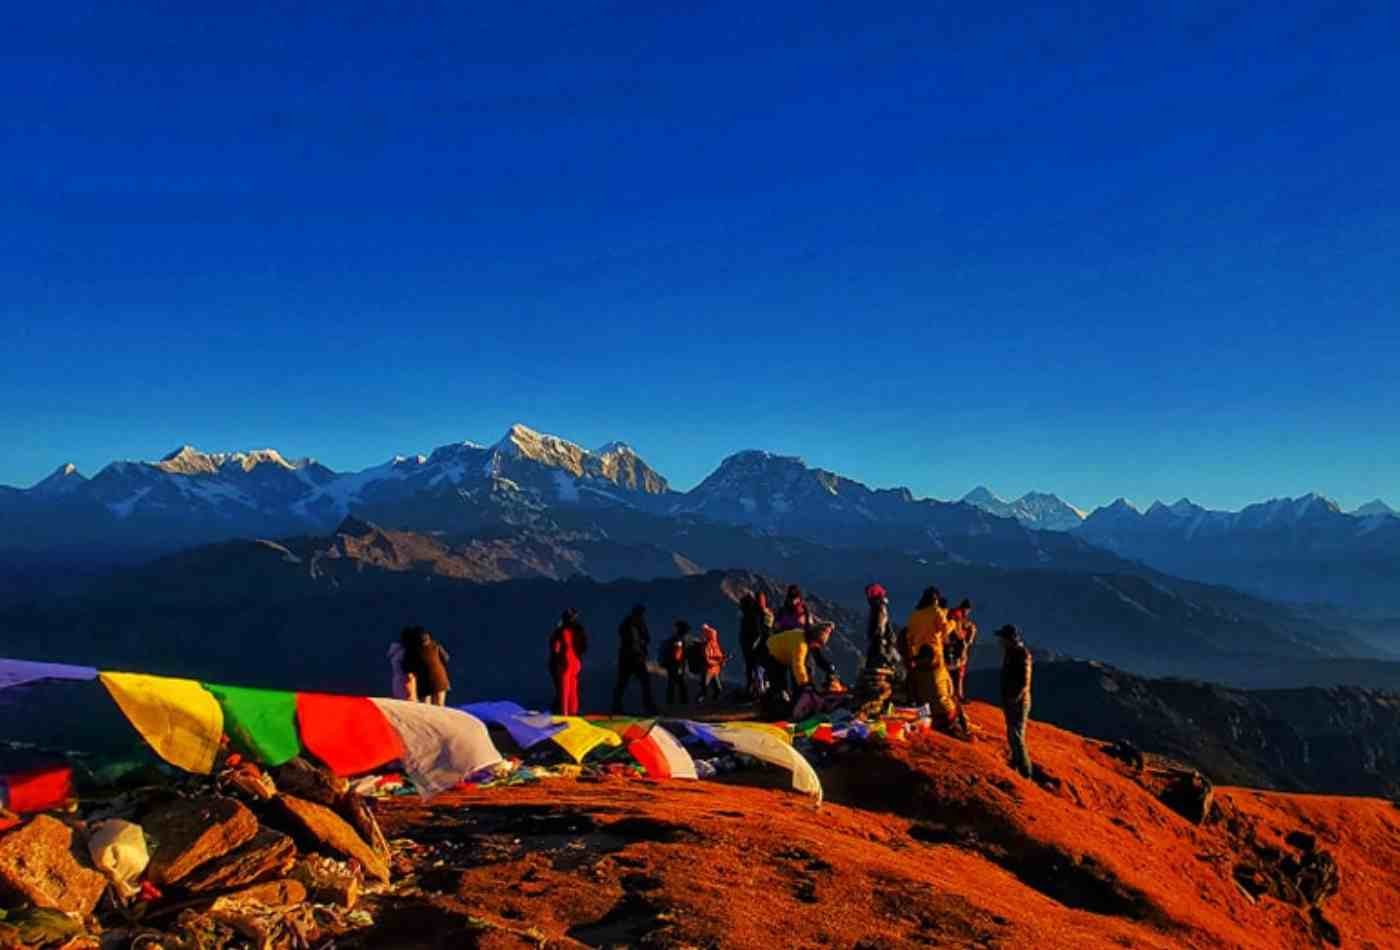 A breathtaking view of Pikey Peak at sunrise, surrounded by majestic mountains and with the distant peak of Mount Everest visible on the horizon.